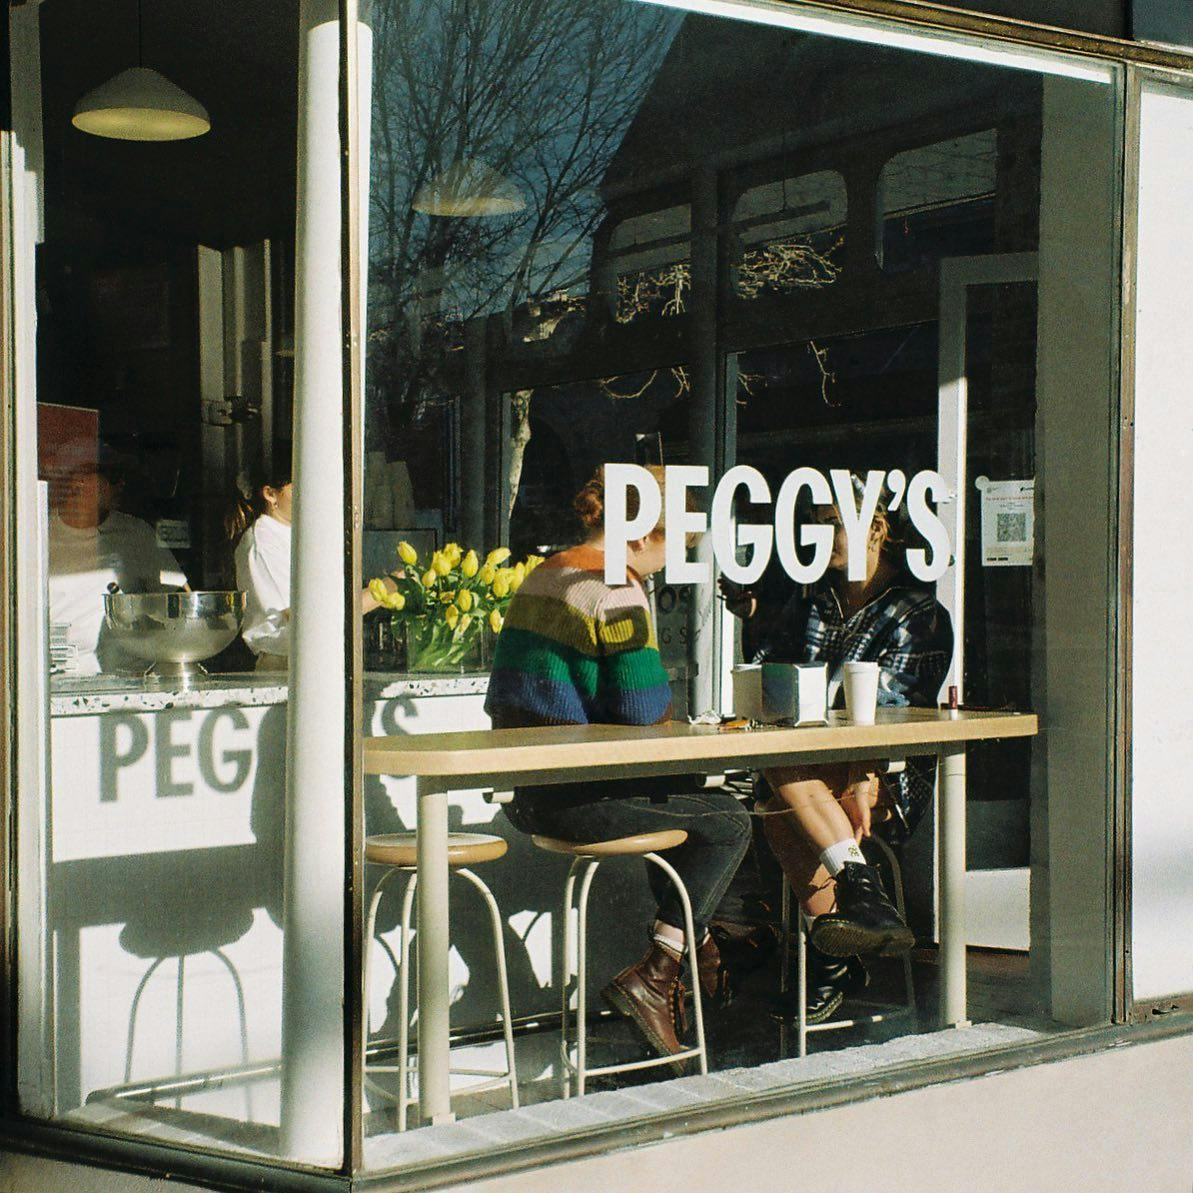 What To Do in Freo, Peggy's